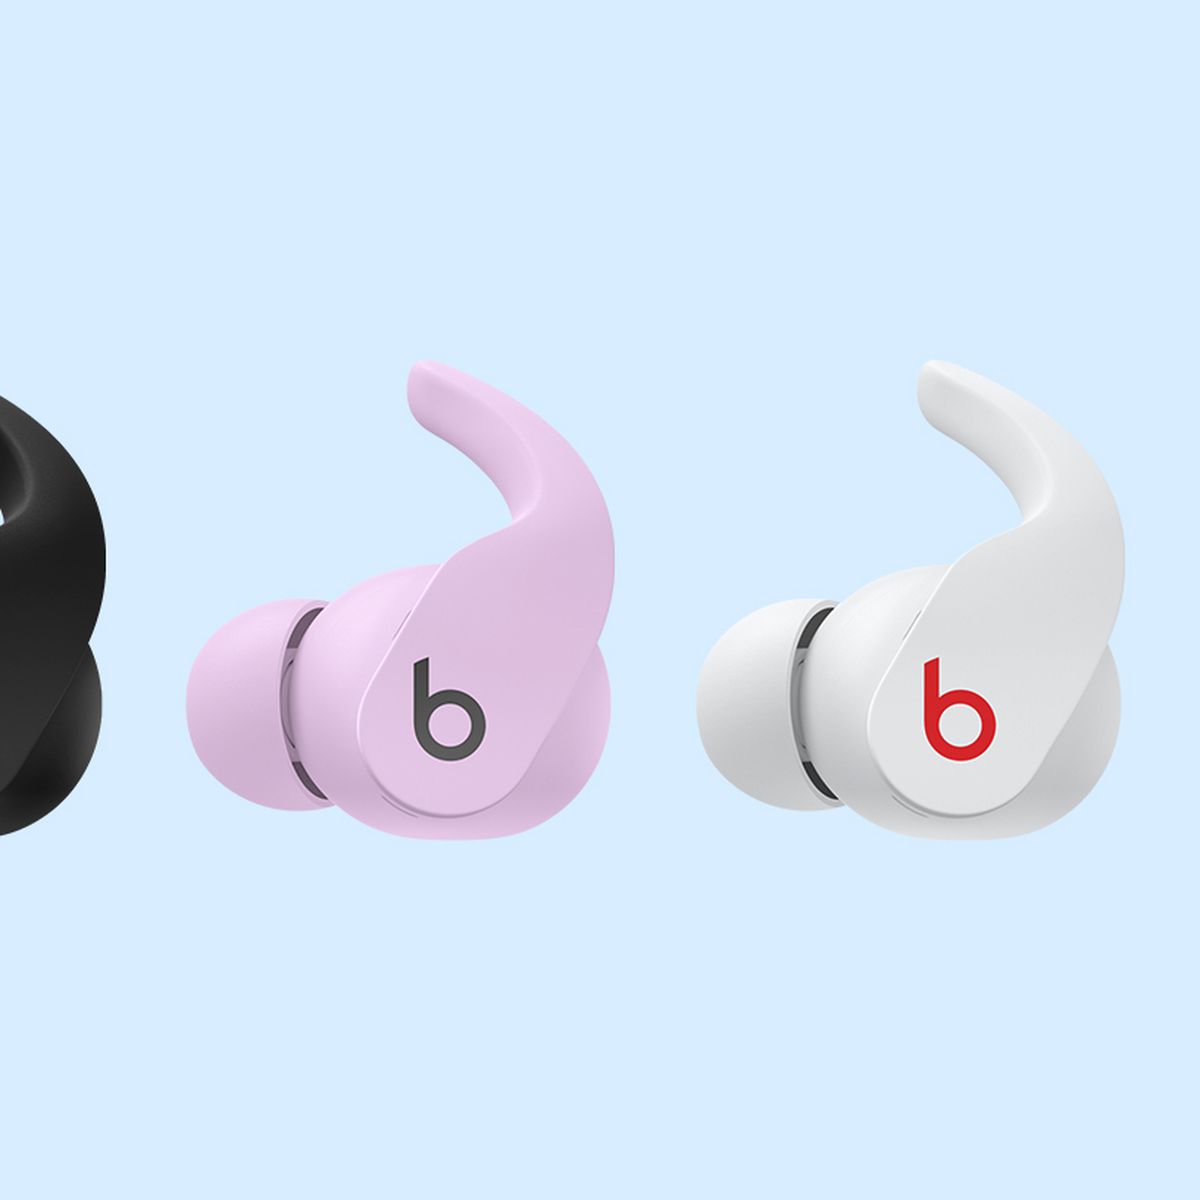 Unreleased Beats Fit Pro earbuds spotted in the wild courtesy of Kim  Kardashian - 9to5Mac